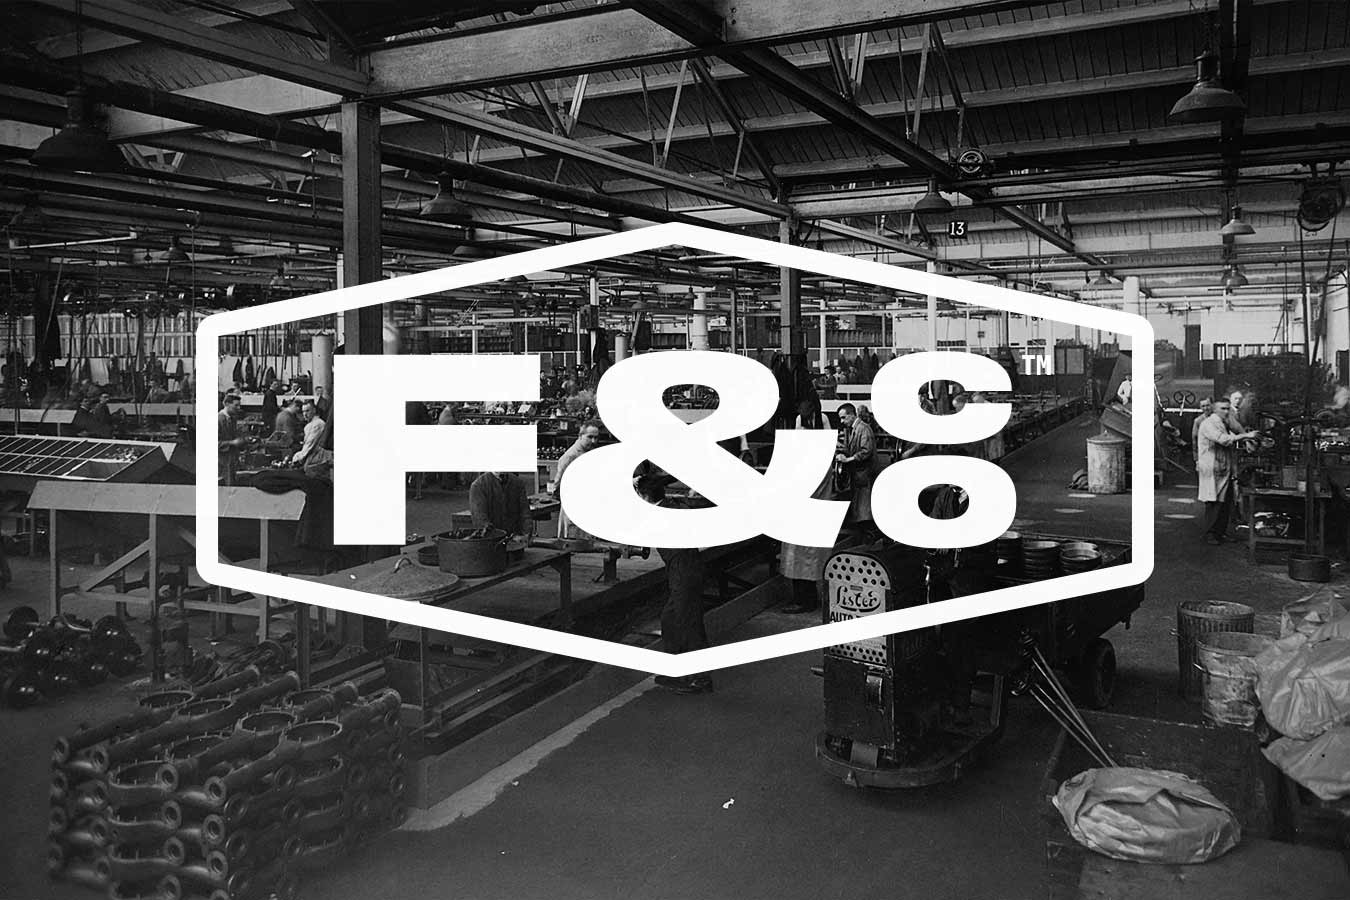 A factory warehouse with workers inside and a stamped F&co logo covering the front, depicted in black and white.